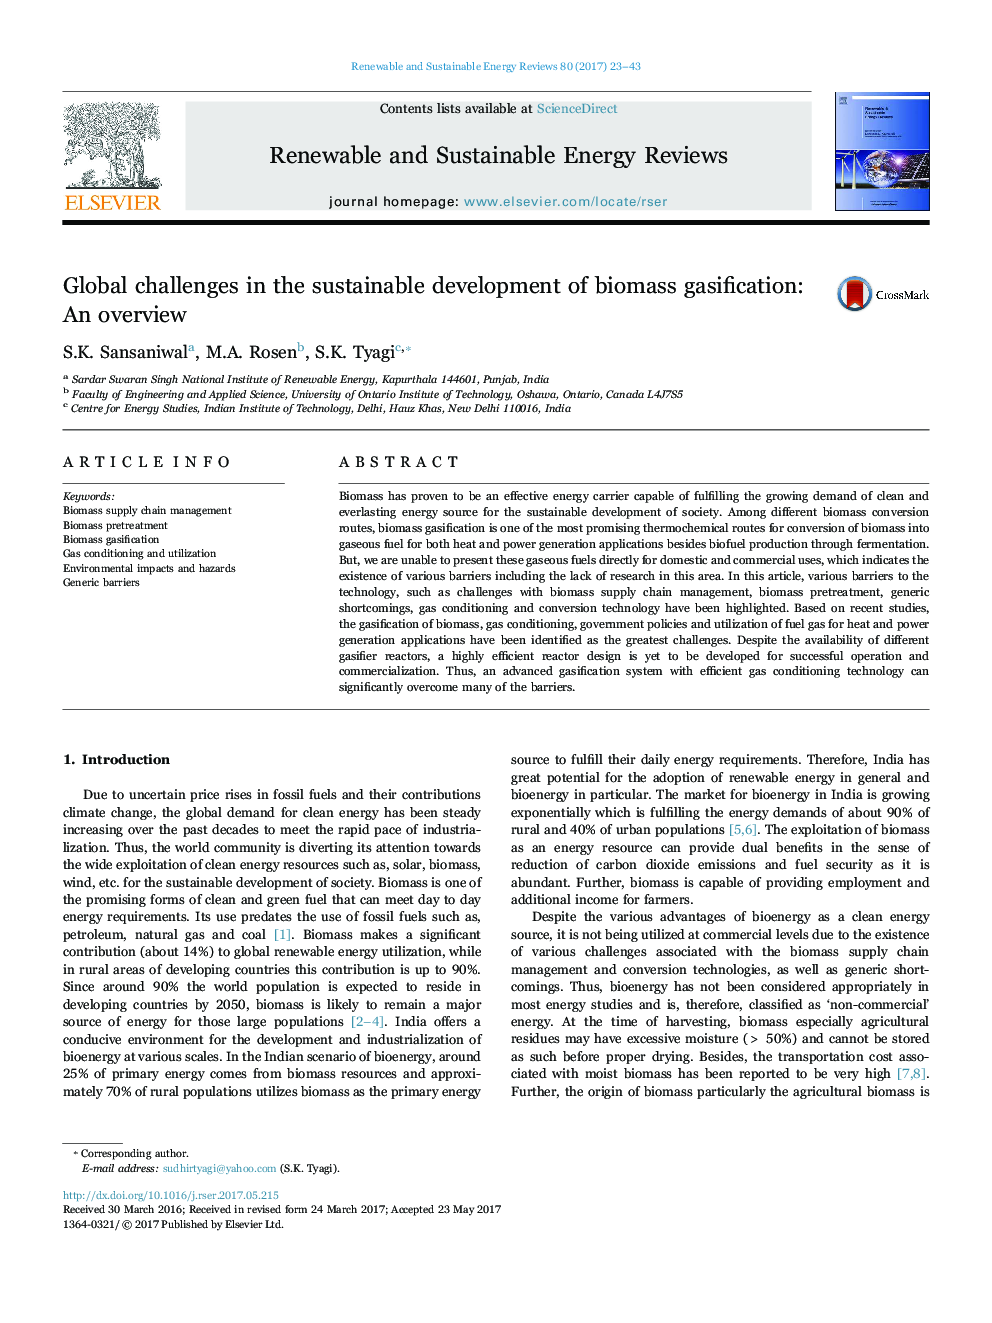 Global challenges in the sustainable development of biomass gasification: An overview